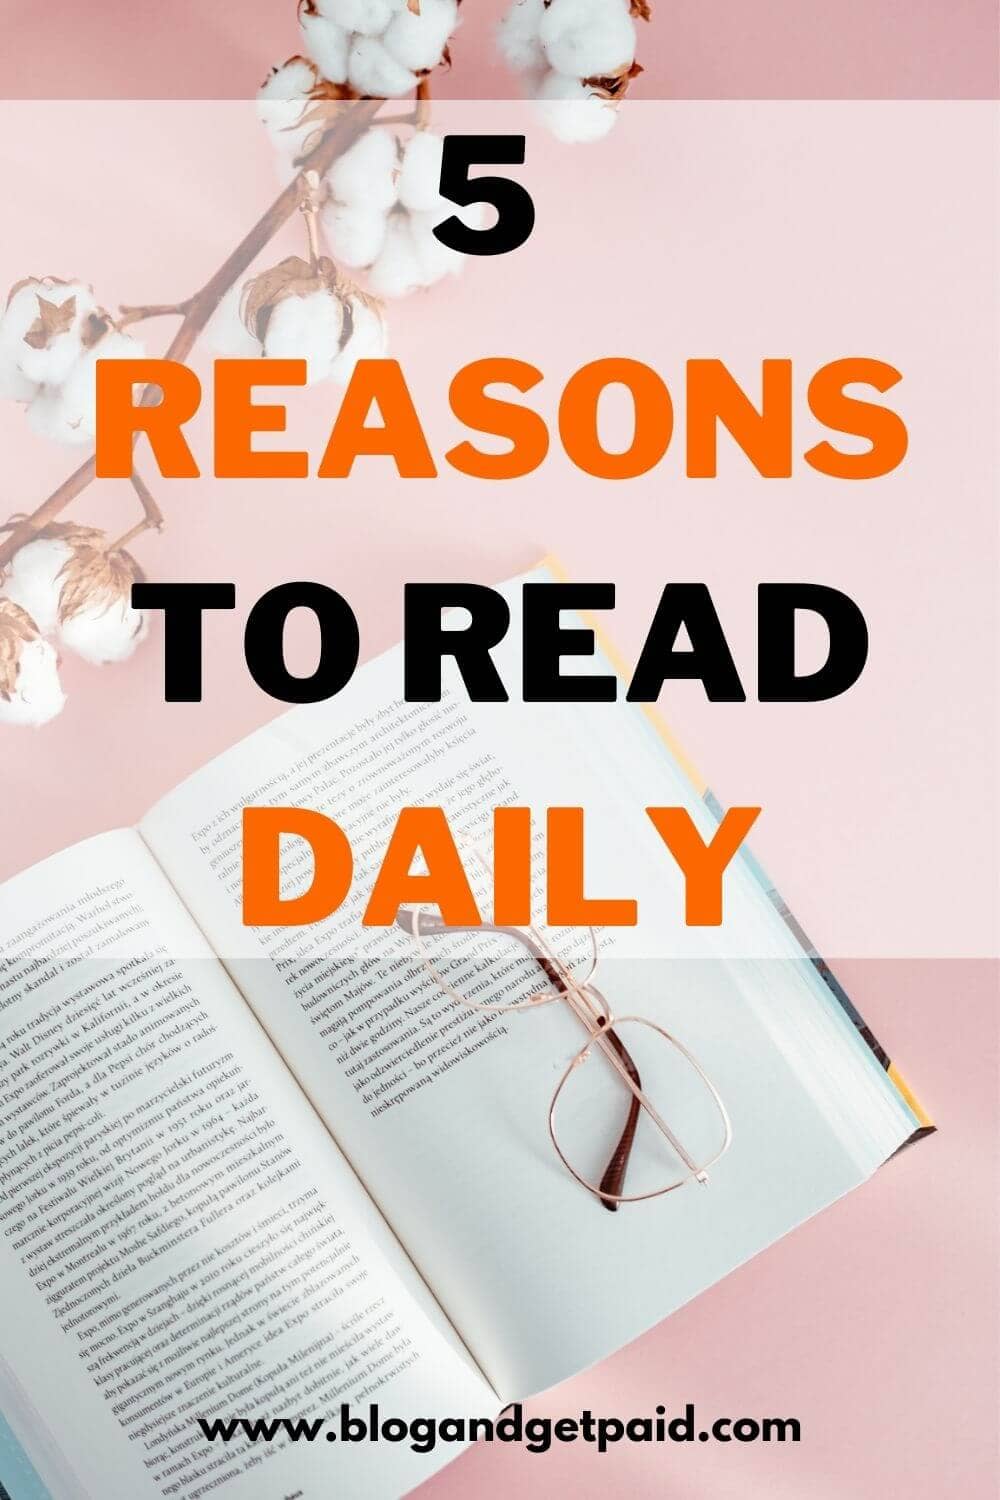 Top 5 Reasons People Should Read Daily